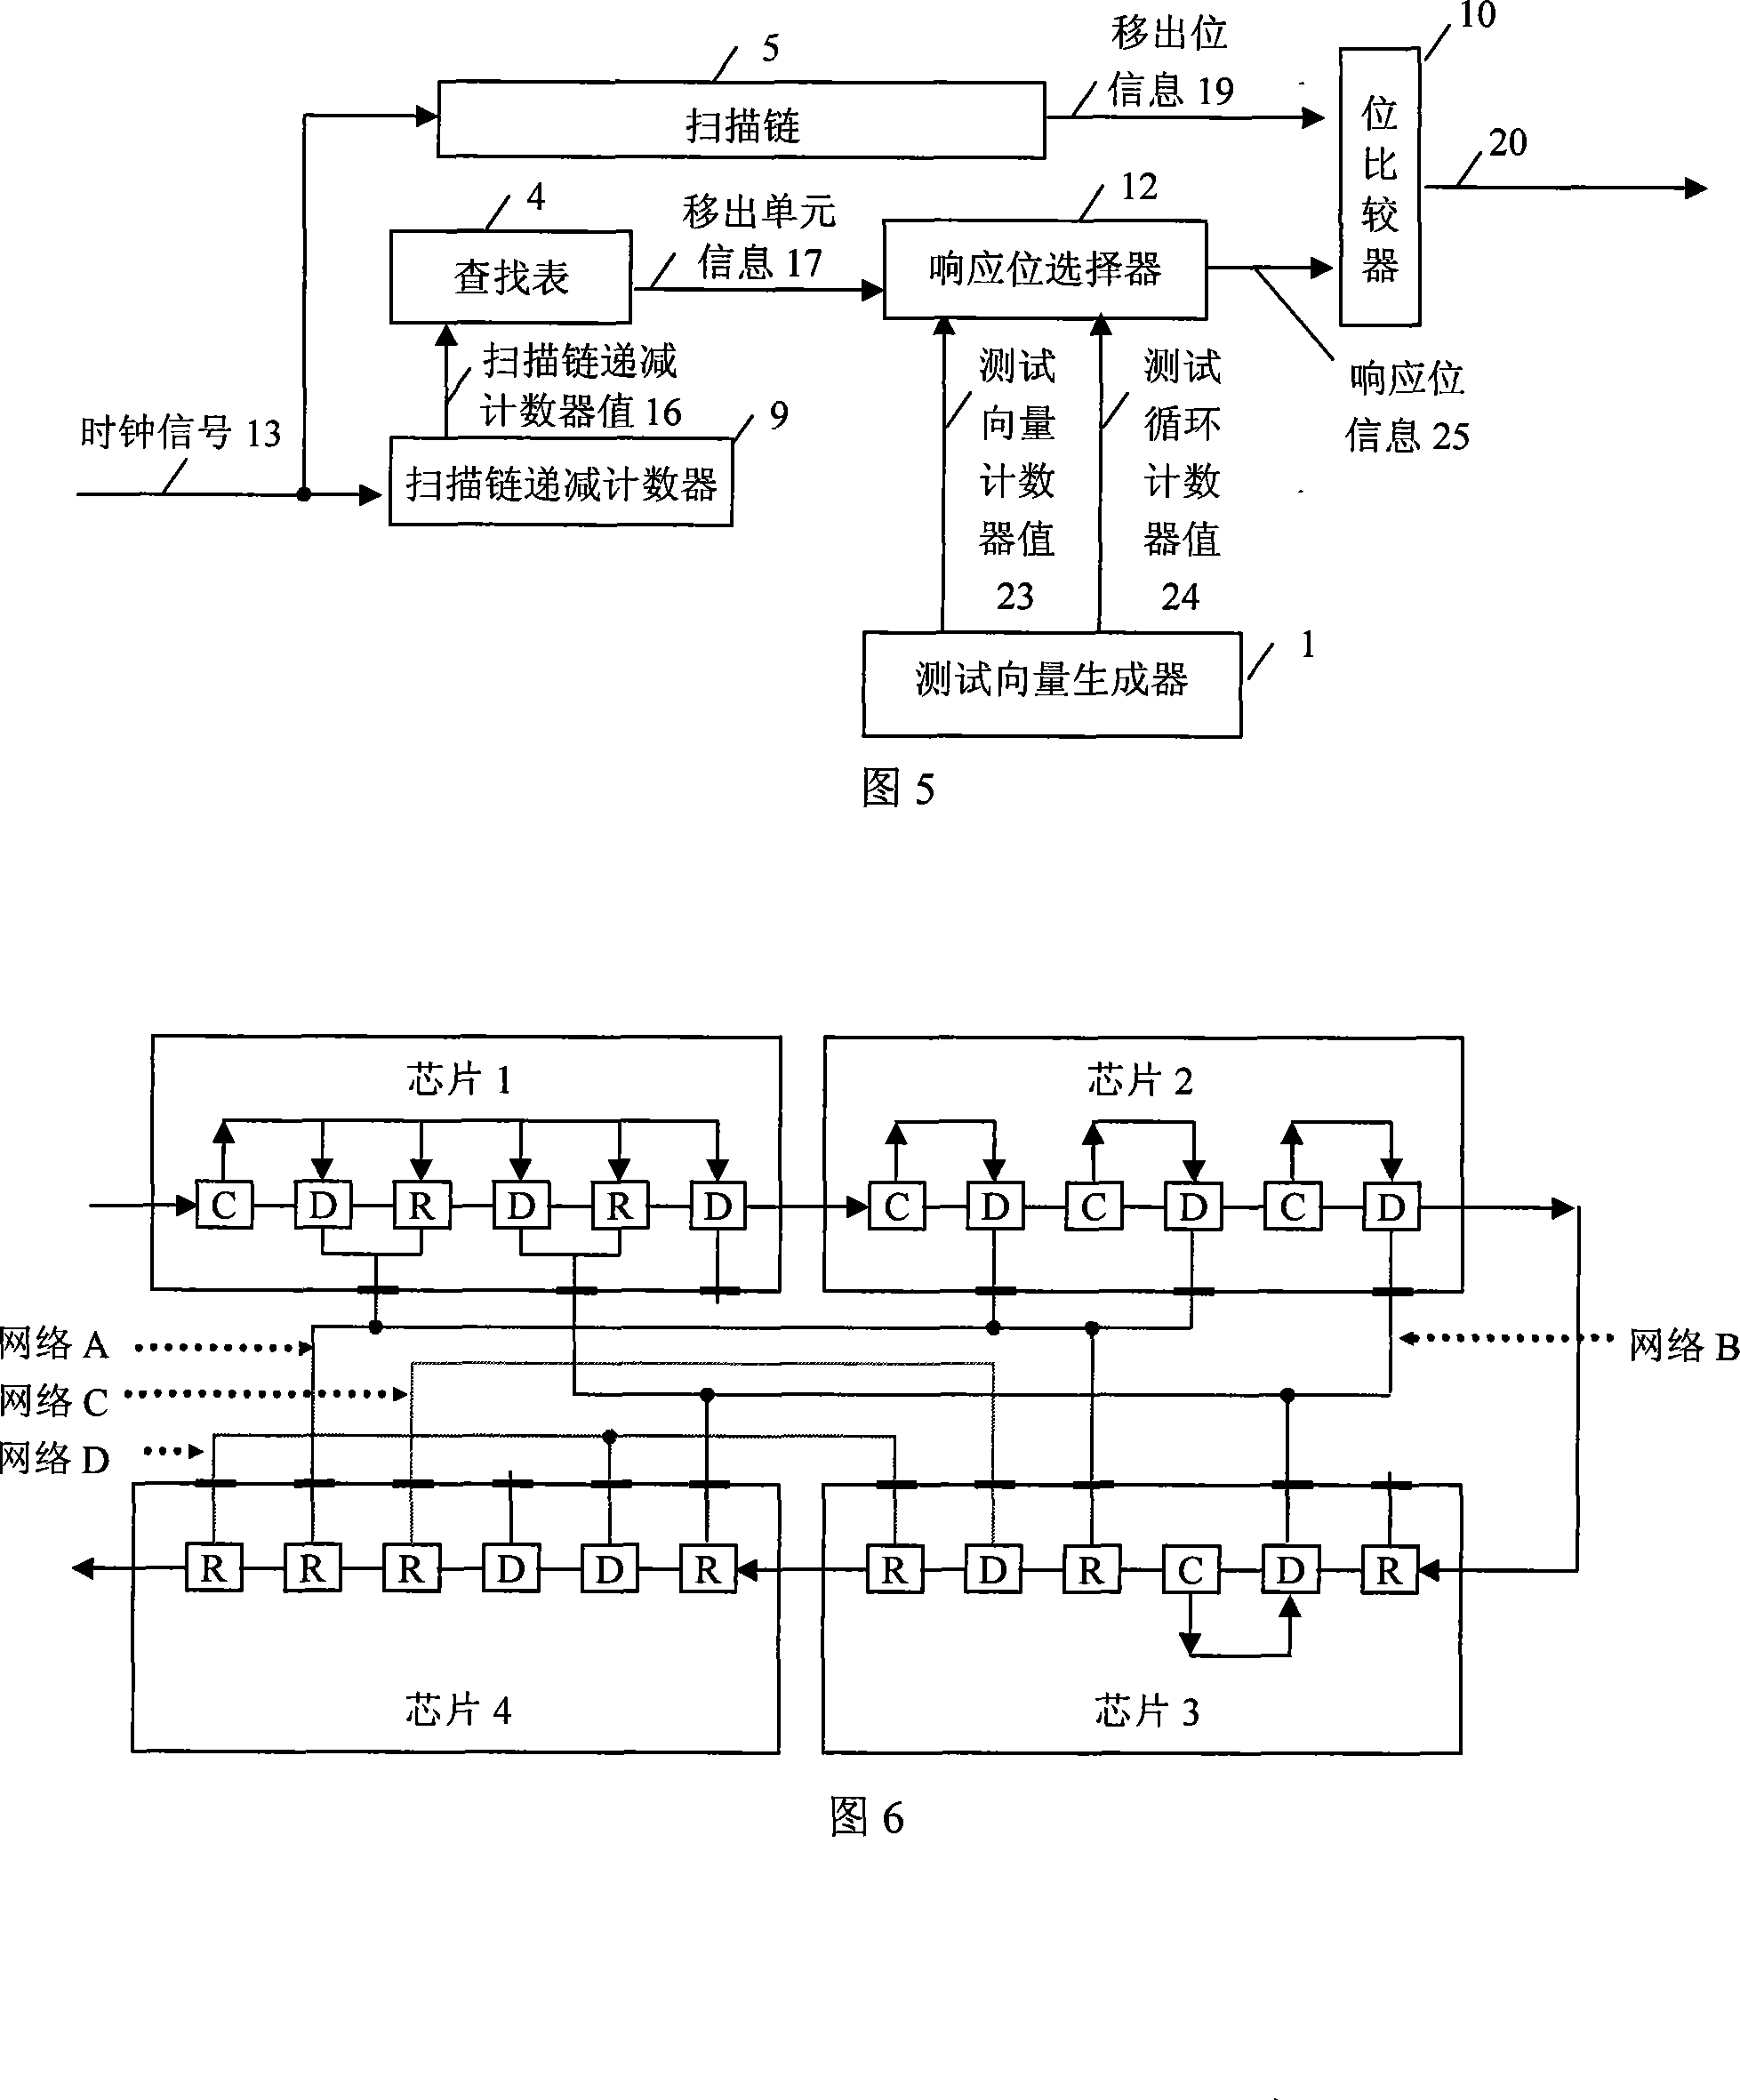 Built-in testing realization method of circuit board interconnect fault under boundary scanning environment